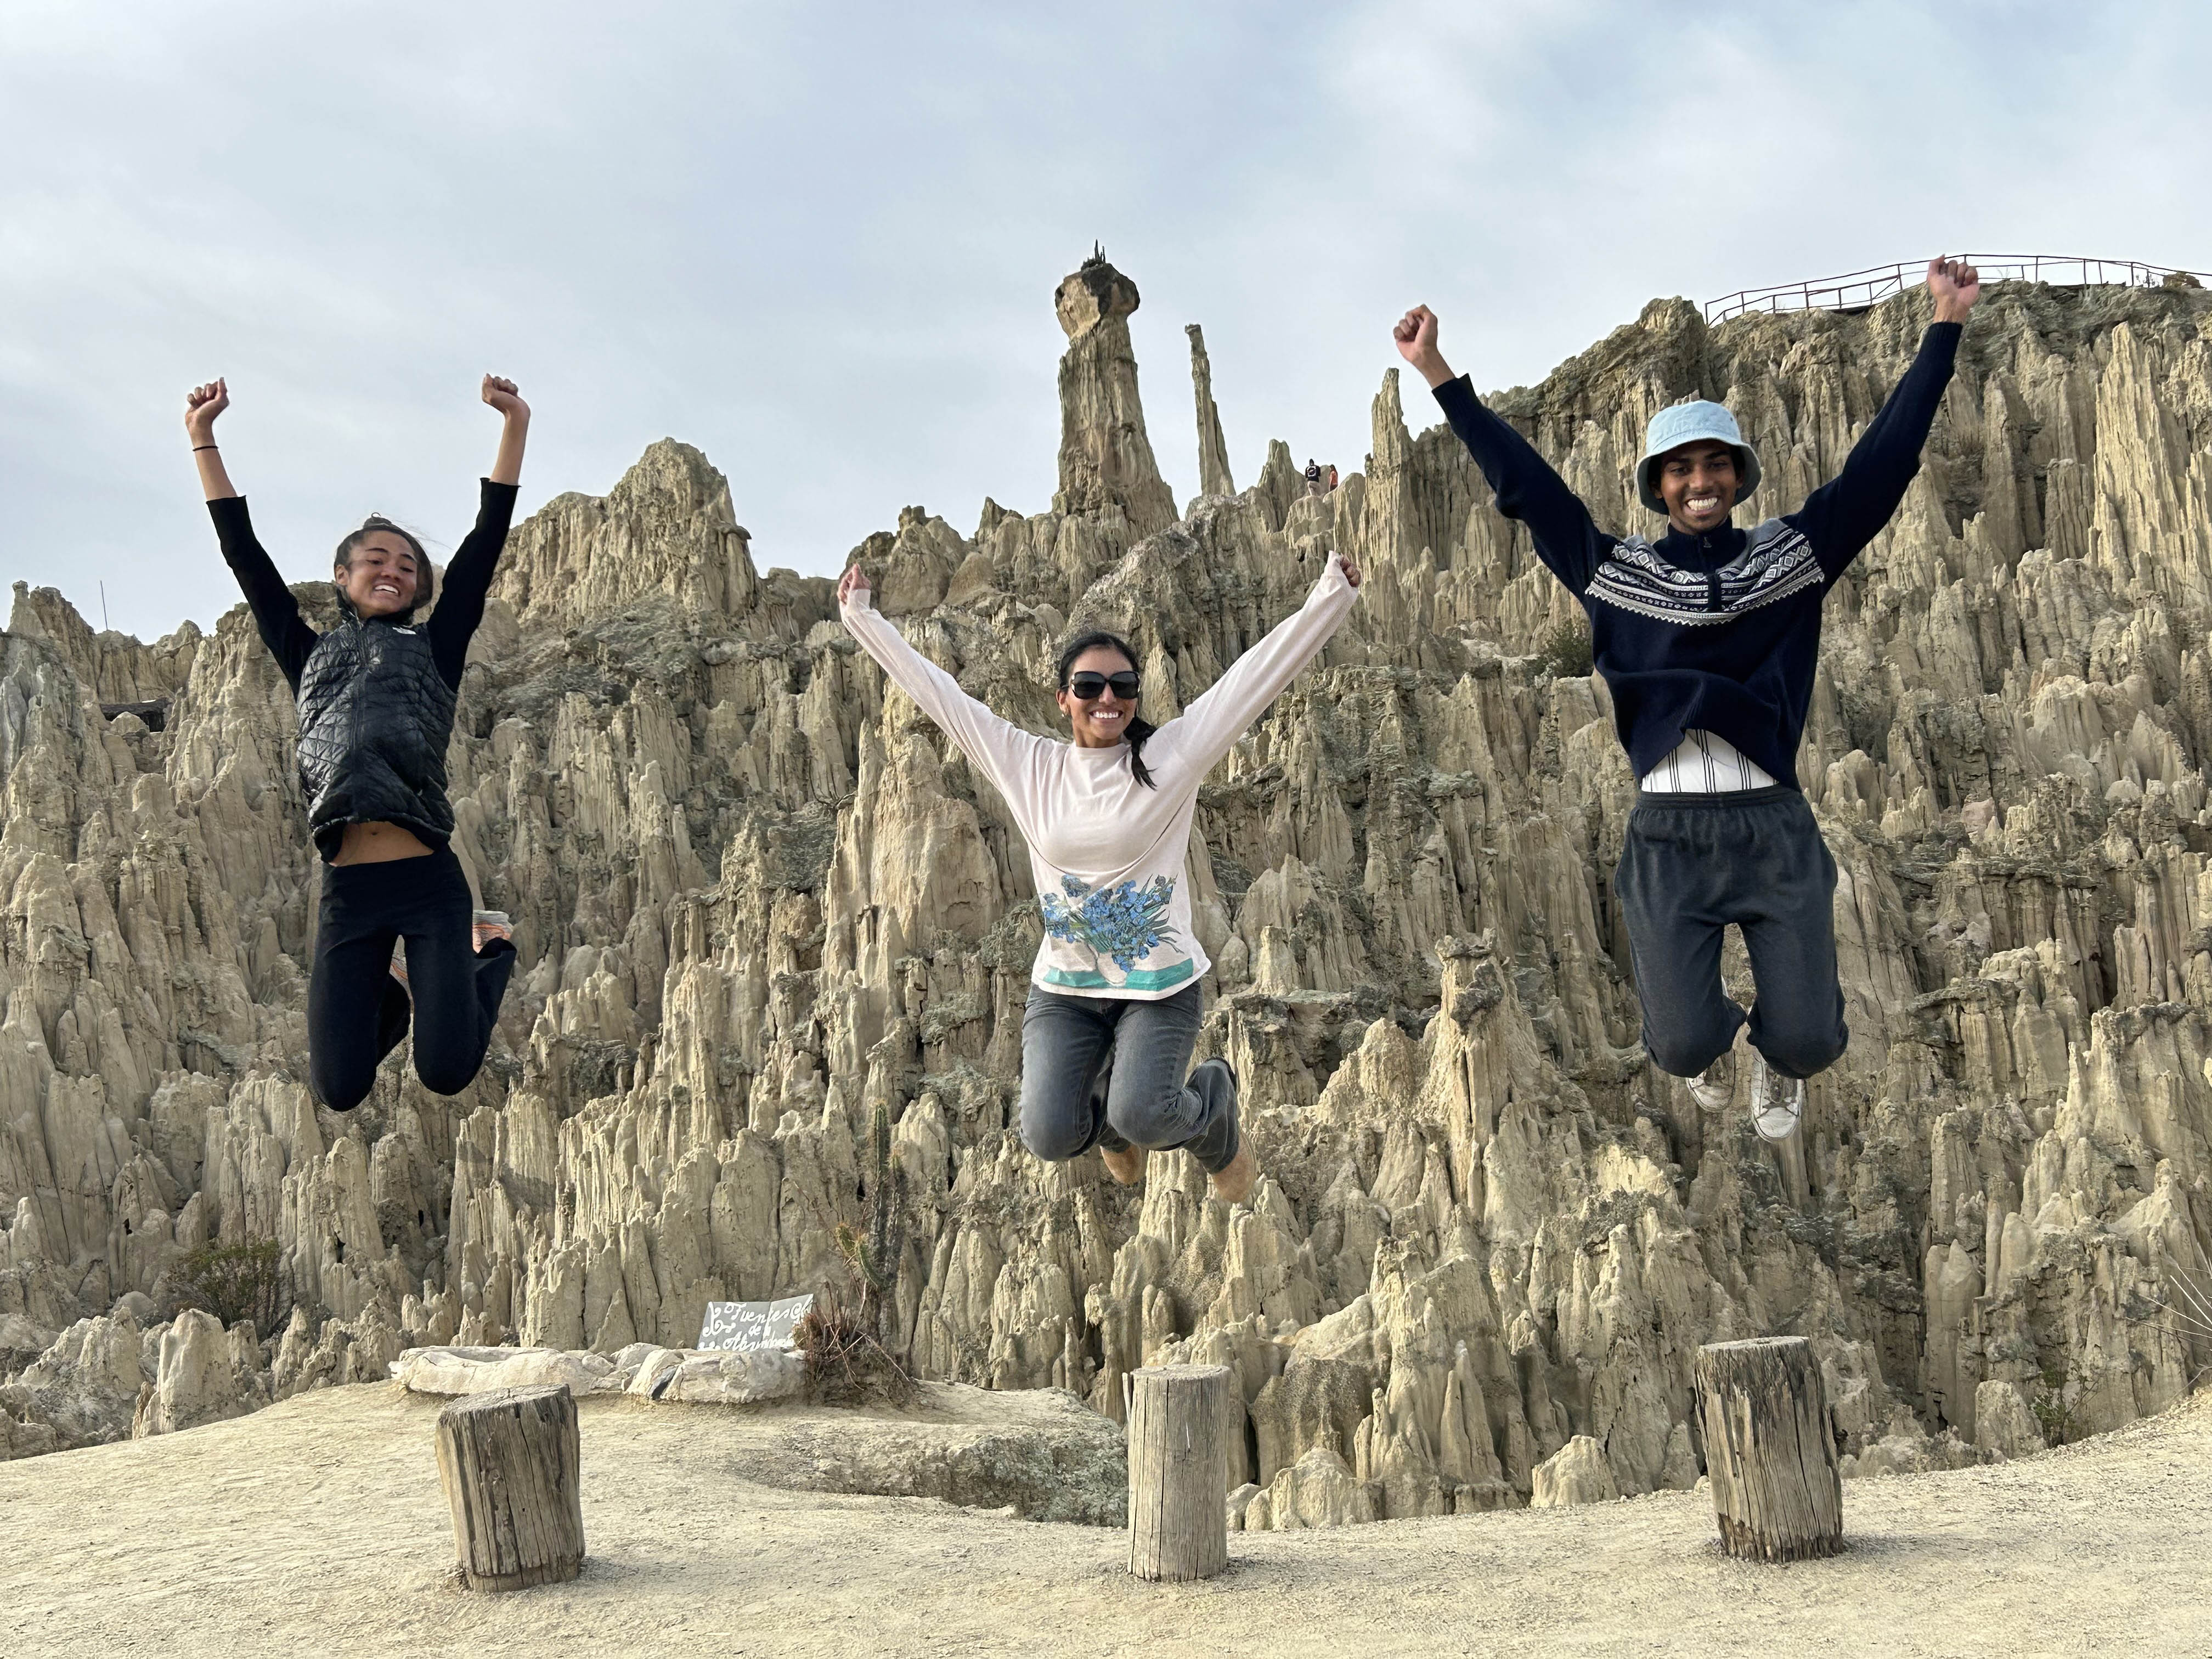 Three student in a large canyon. The all jump in the air at the same time and the photo captures them high in the air, smiling.